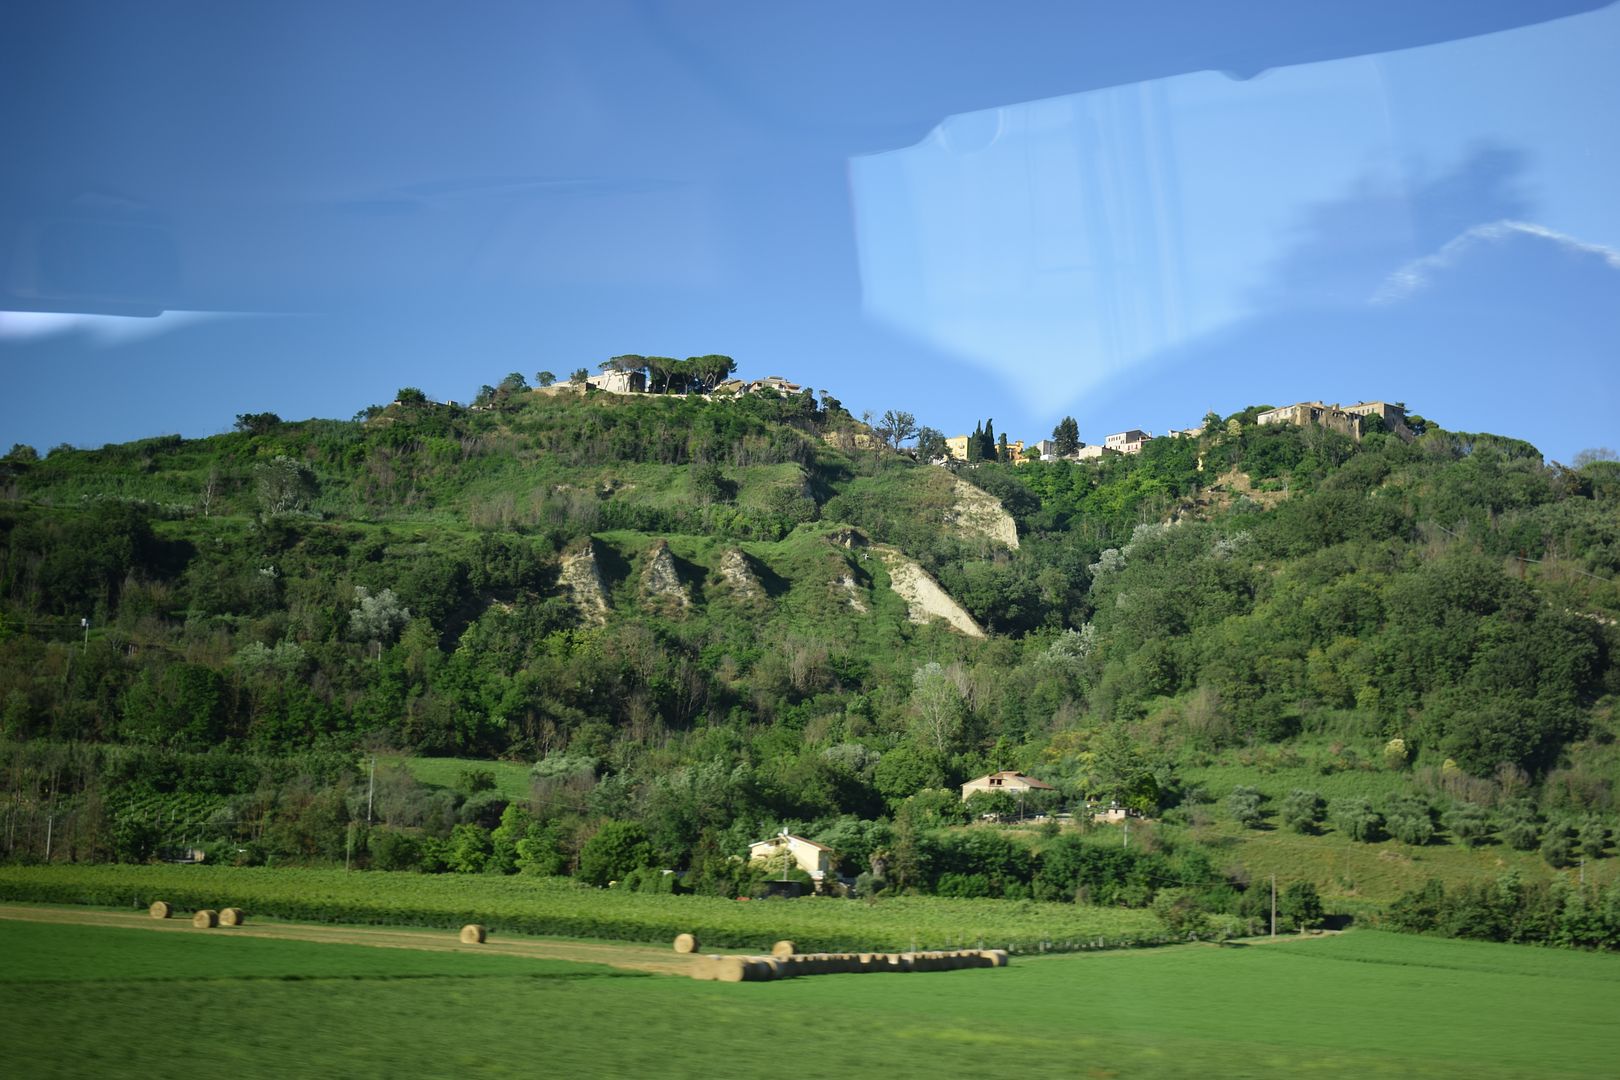  photo First views of Tuscany from the coach 4_zpstnfuhwjf.jpg